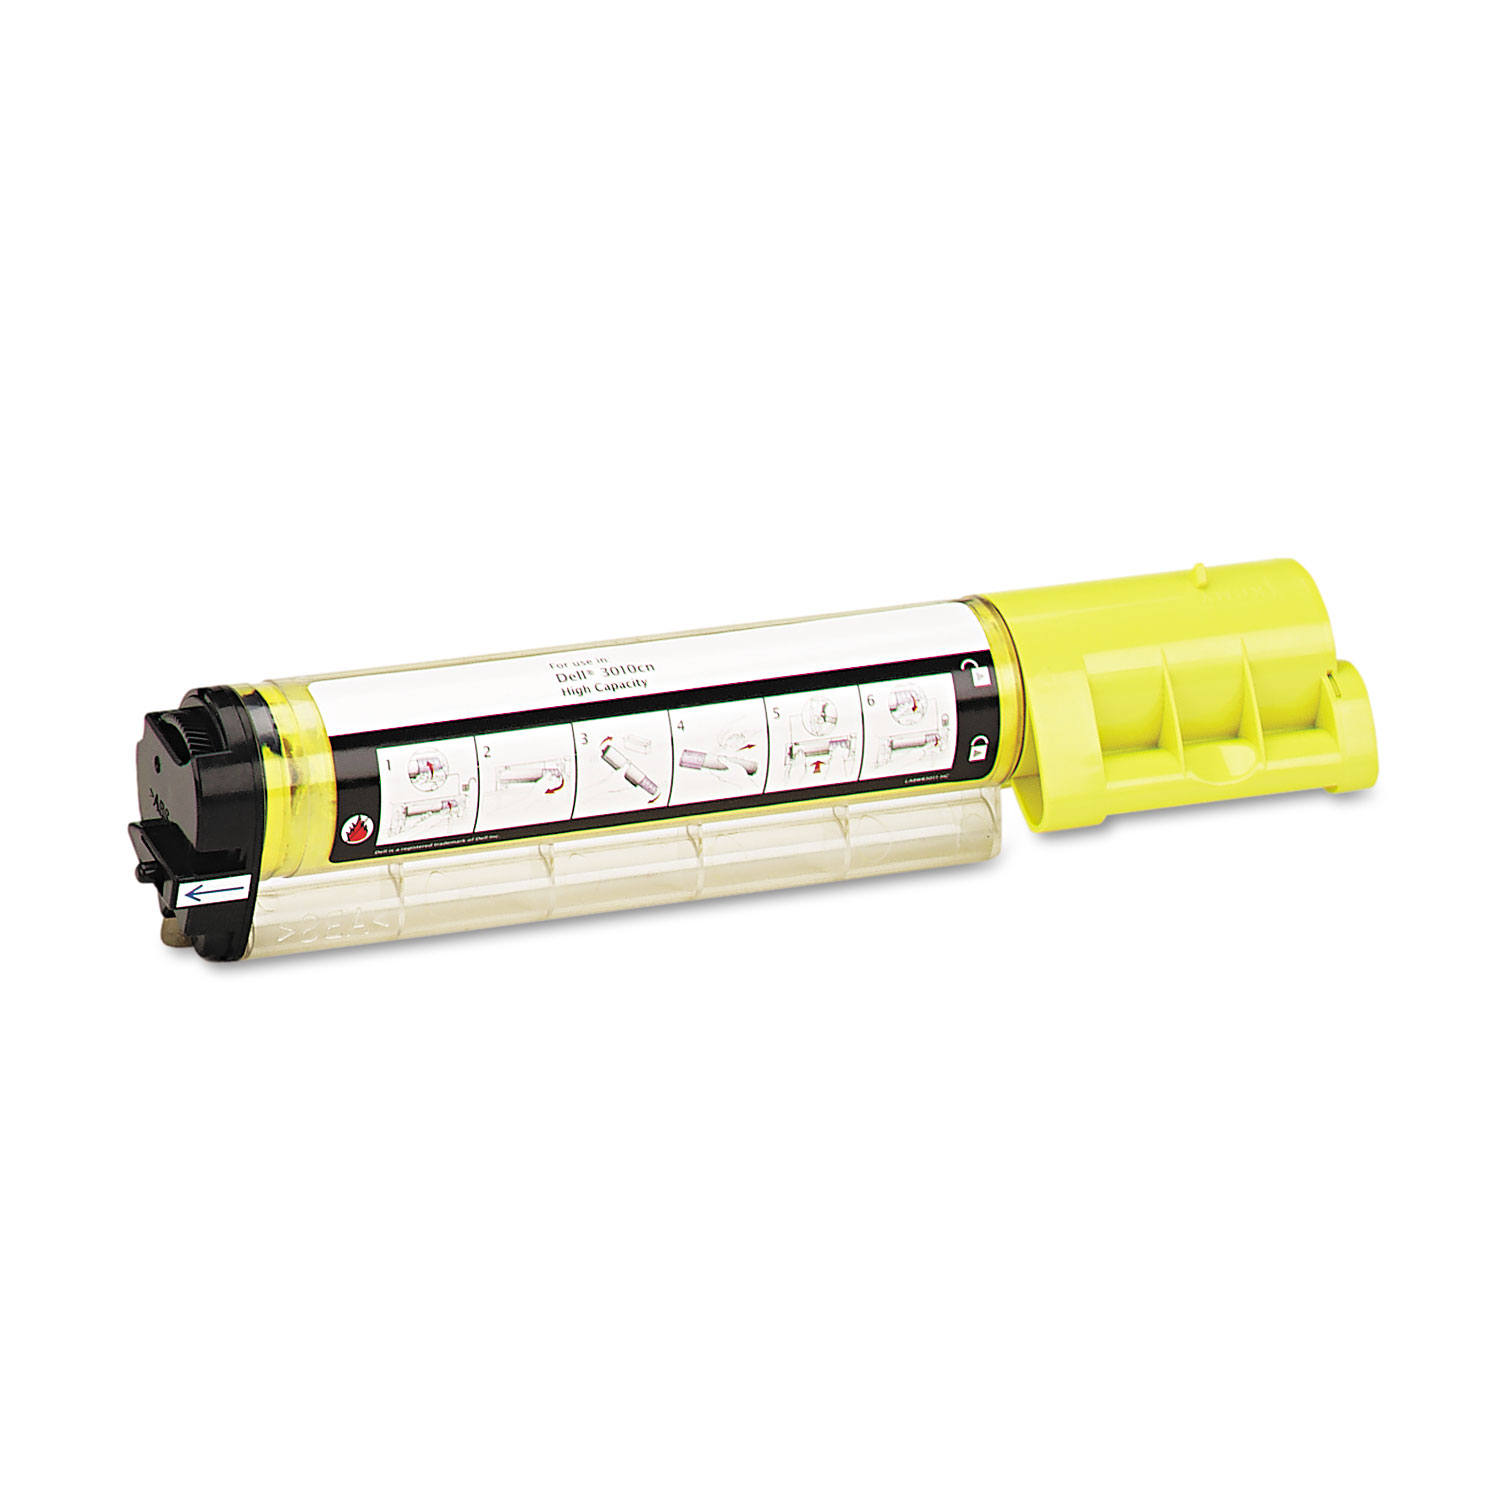  Dataproducts DPCD3010Y Compatible 341-3569 (3010) High-Yield Toner, 4000 Page-Yield, Yellow (DPSDPCD3010Y) 